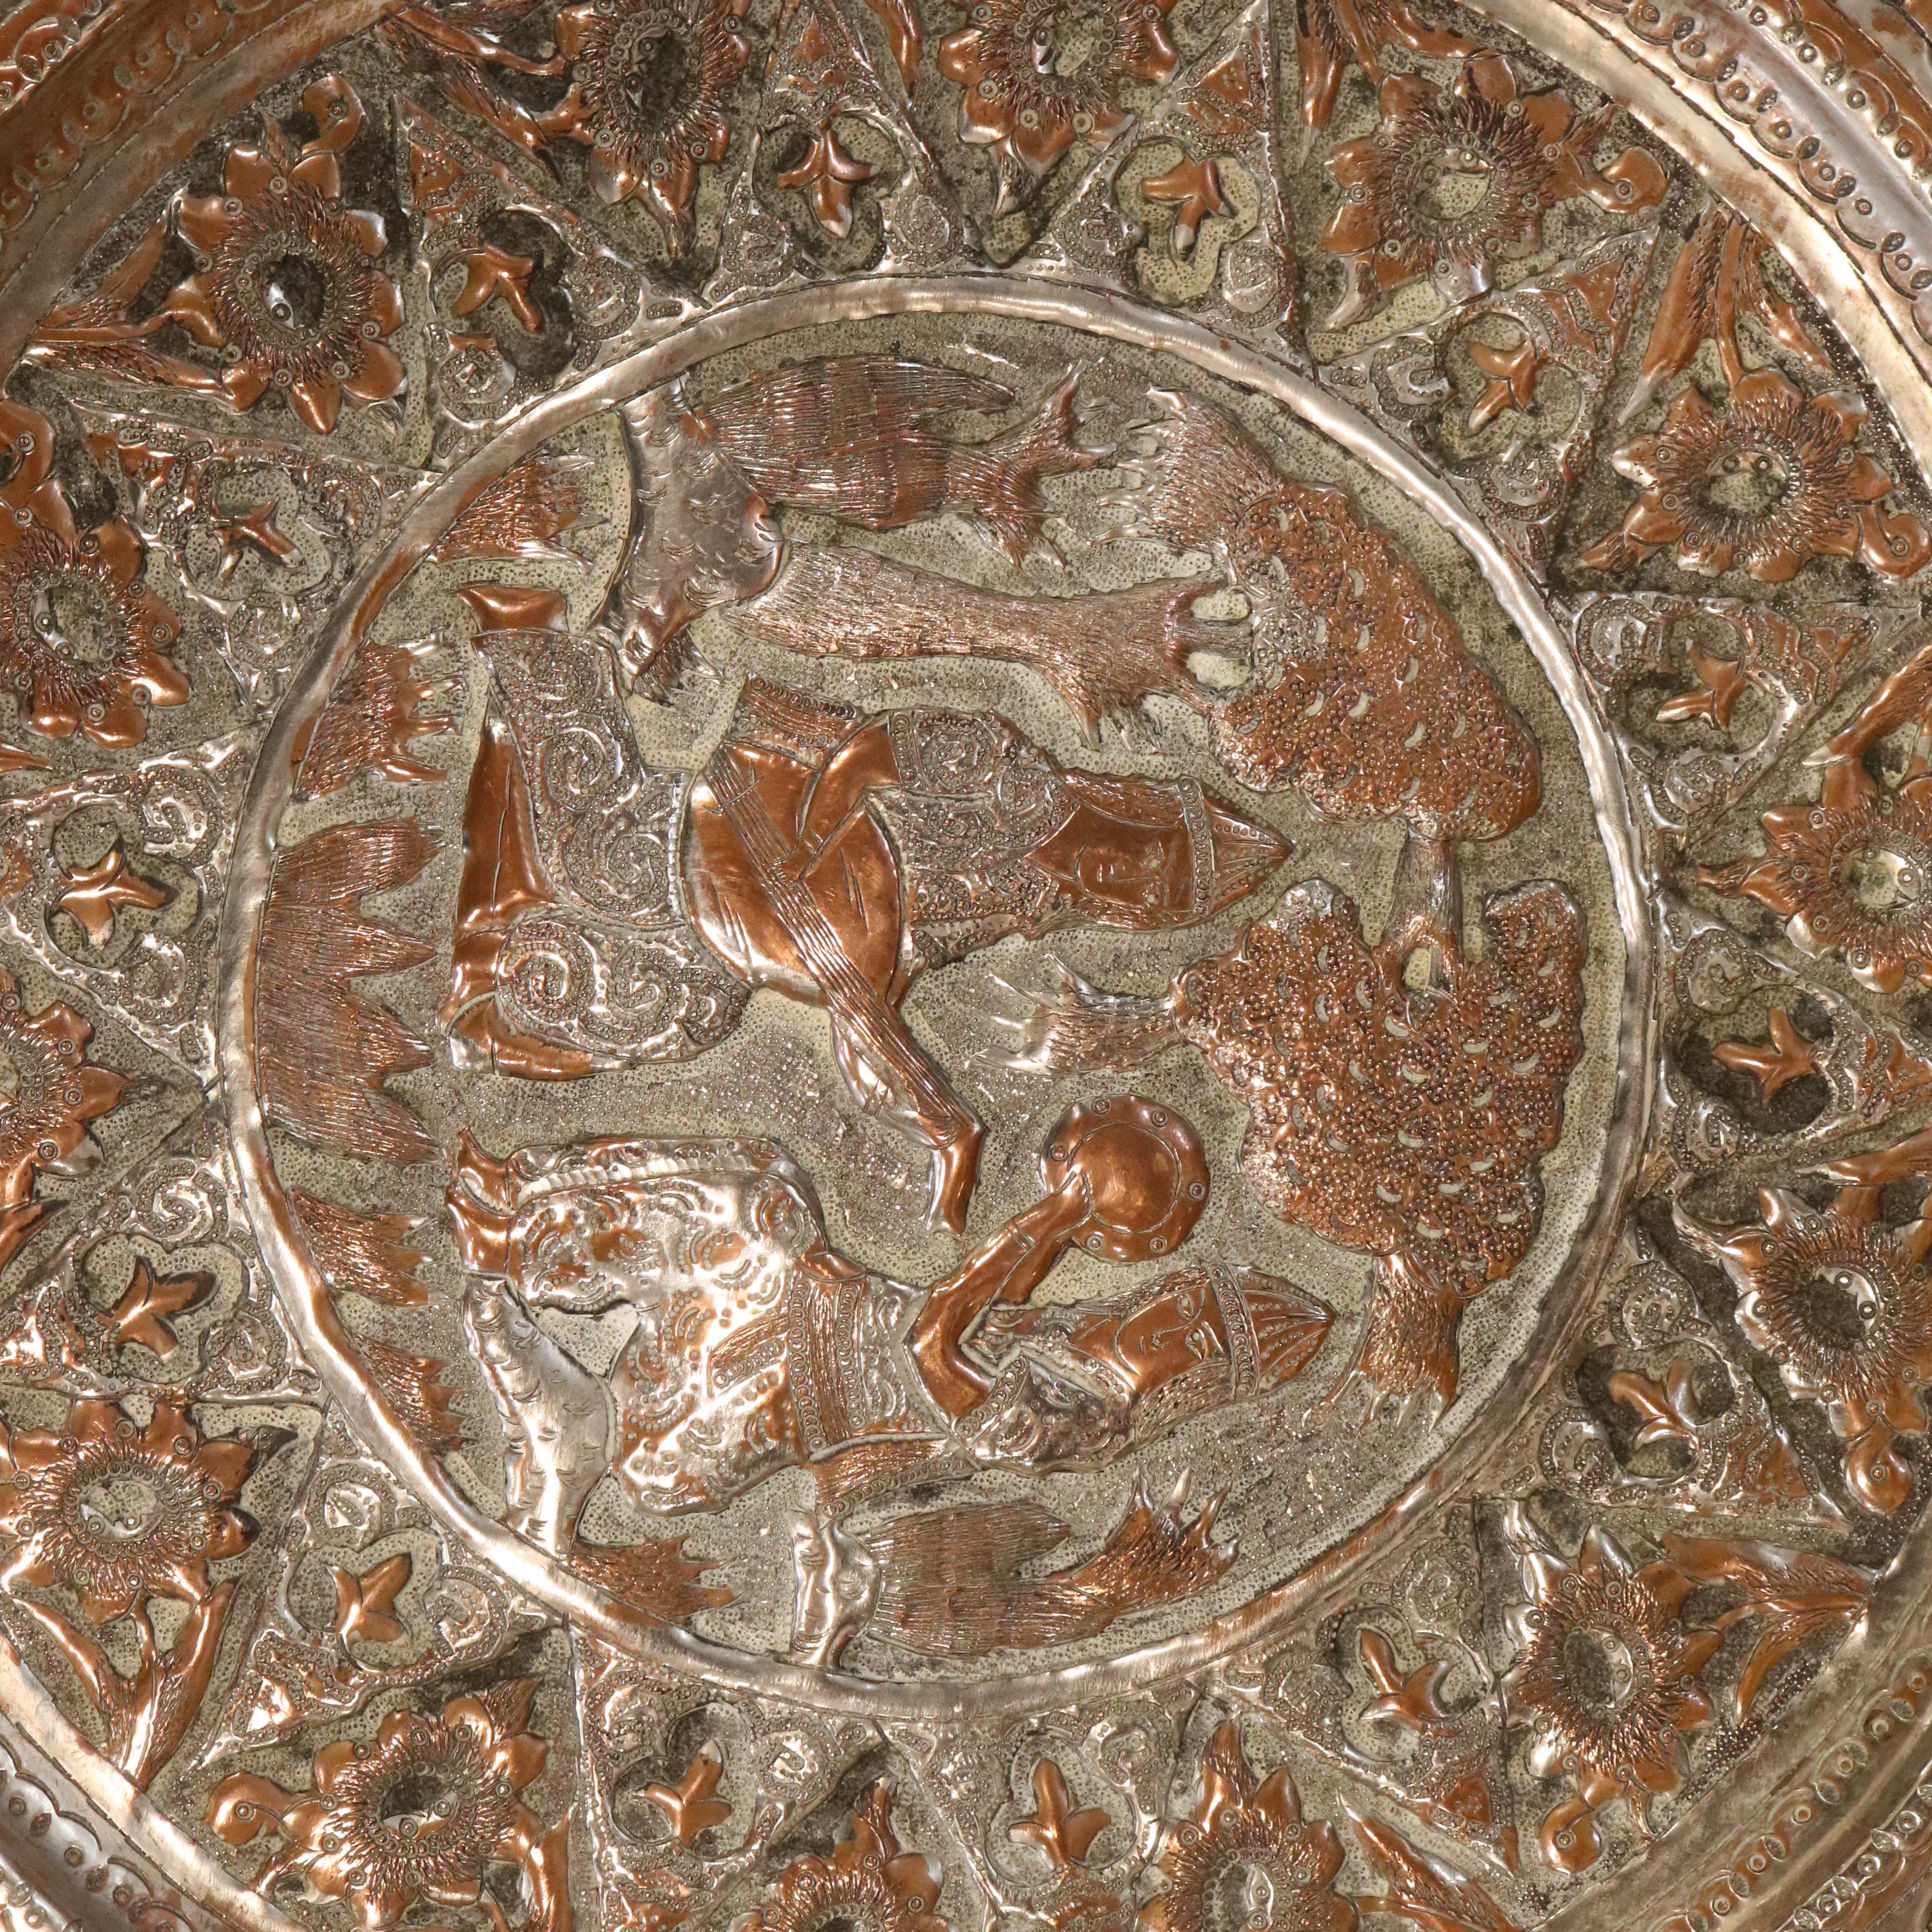 An early-to-mid 20th Century Persian copper-topped and mother-of-pearl inlaid folding table, 52 cm x - Image 4 of 4